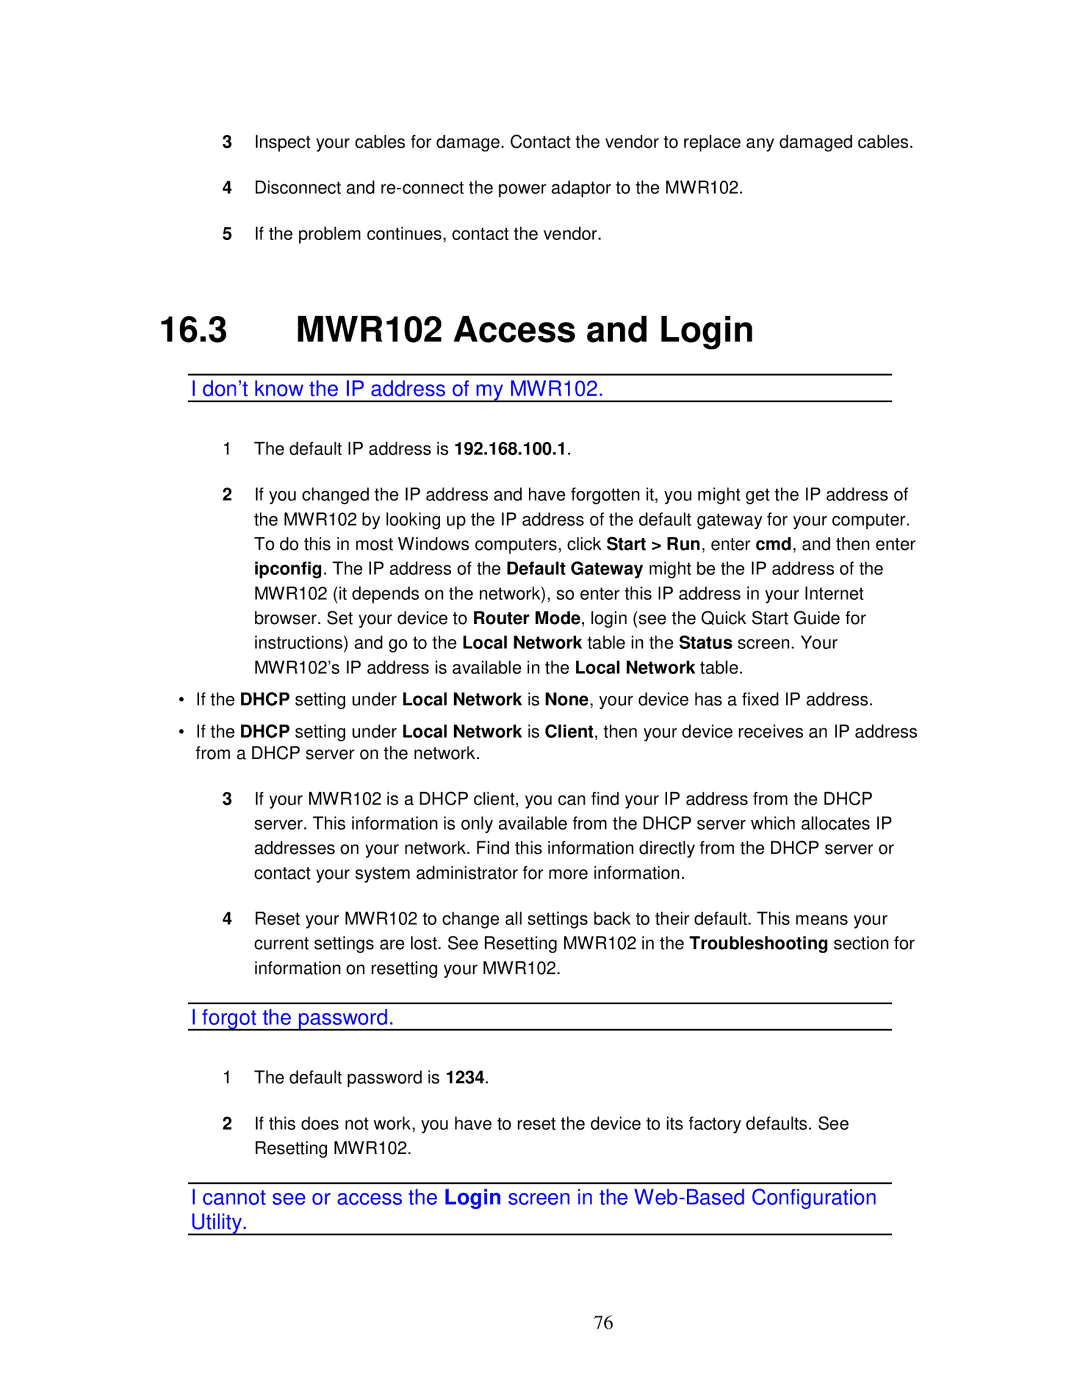 ZyXEL Communications manual 16.3 MWR102 Access and Login, Don’t know the IP address of my MWR102 